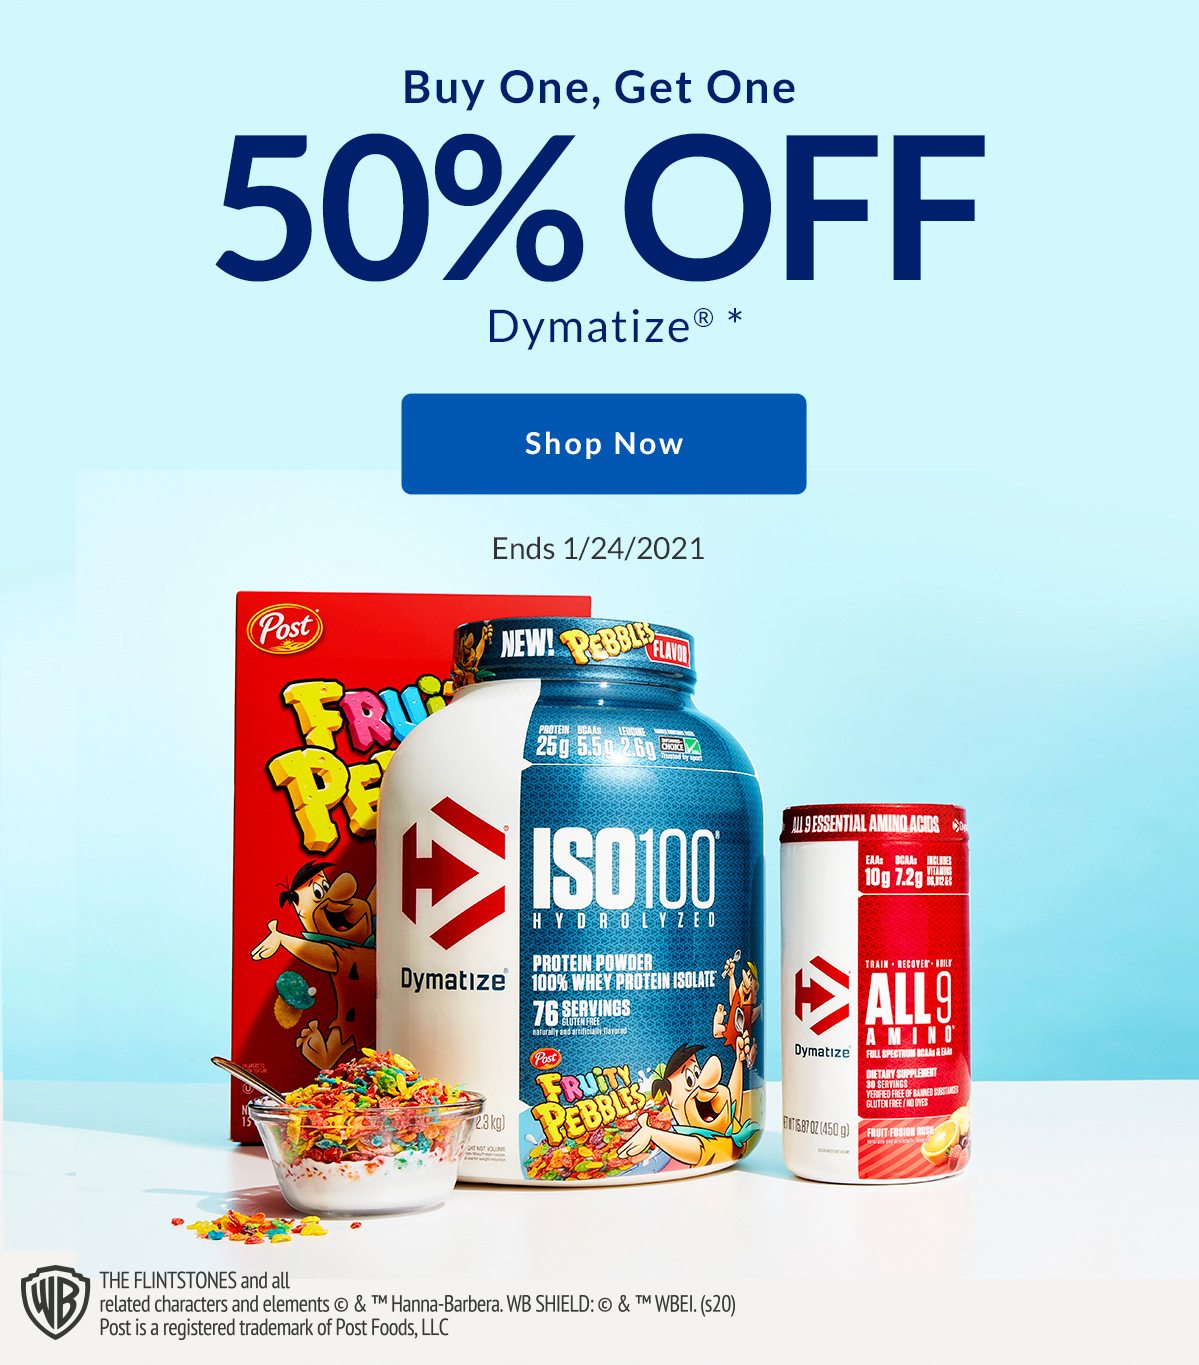 Buy One, Get One 50% OFF Dymatize * | Shop Now | Ends 1/24/2021